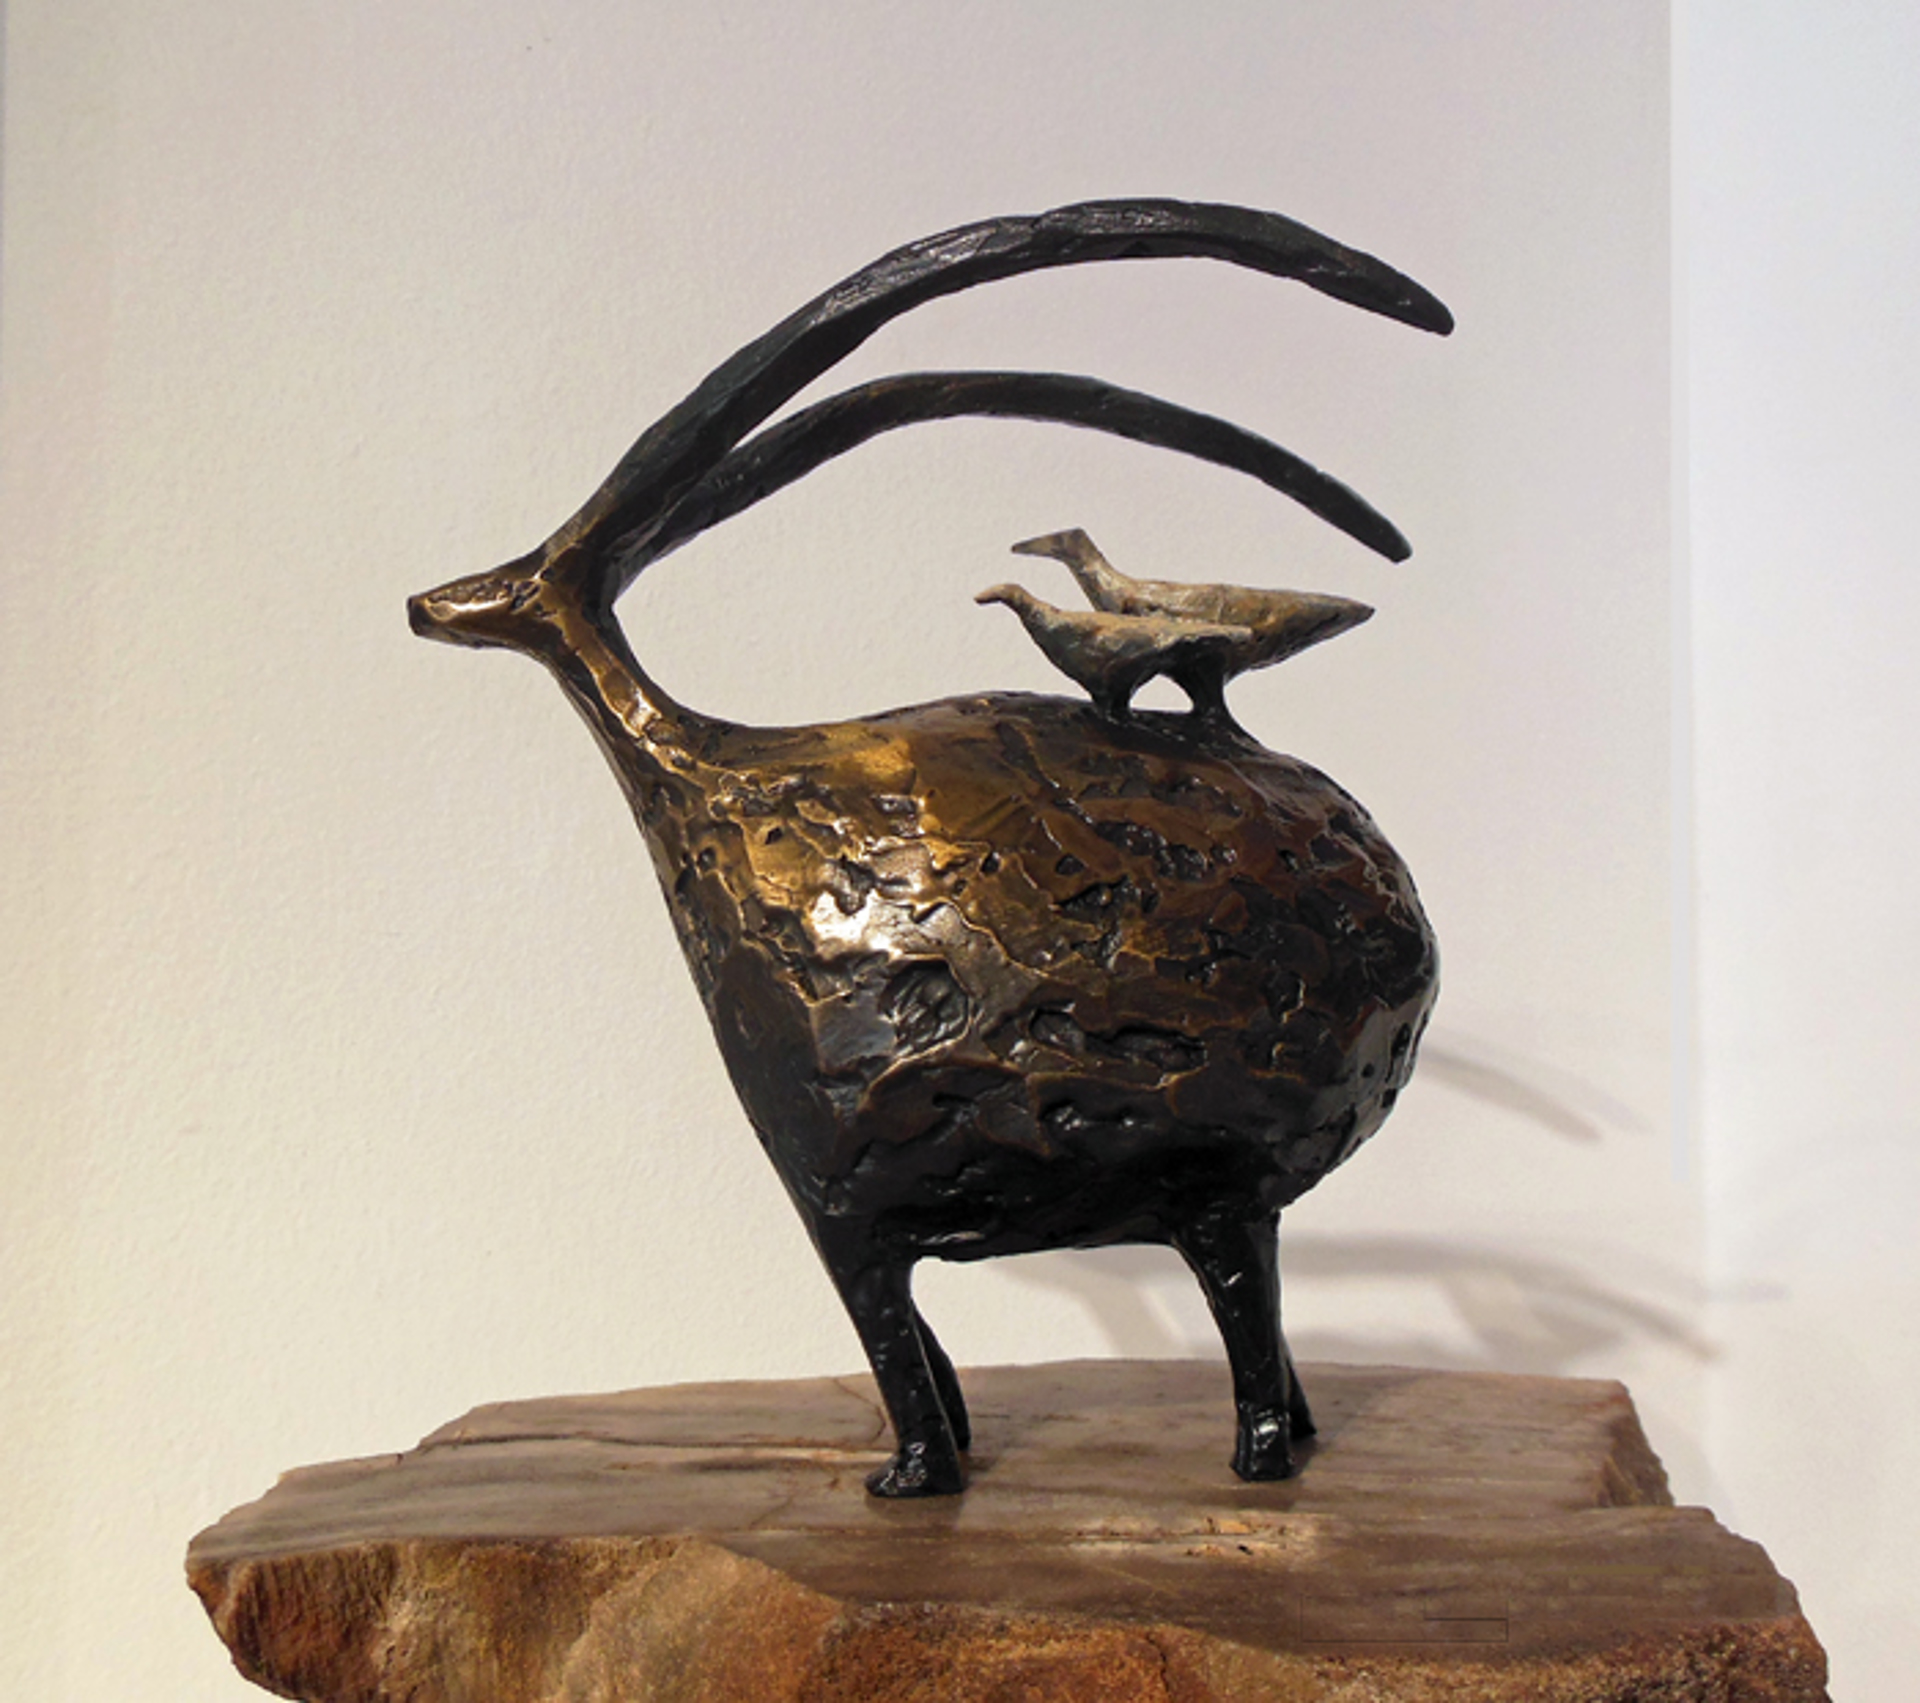 INTO THE WIND - MINI (rock pedestal purchased separately) by Jill Shwaiko